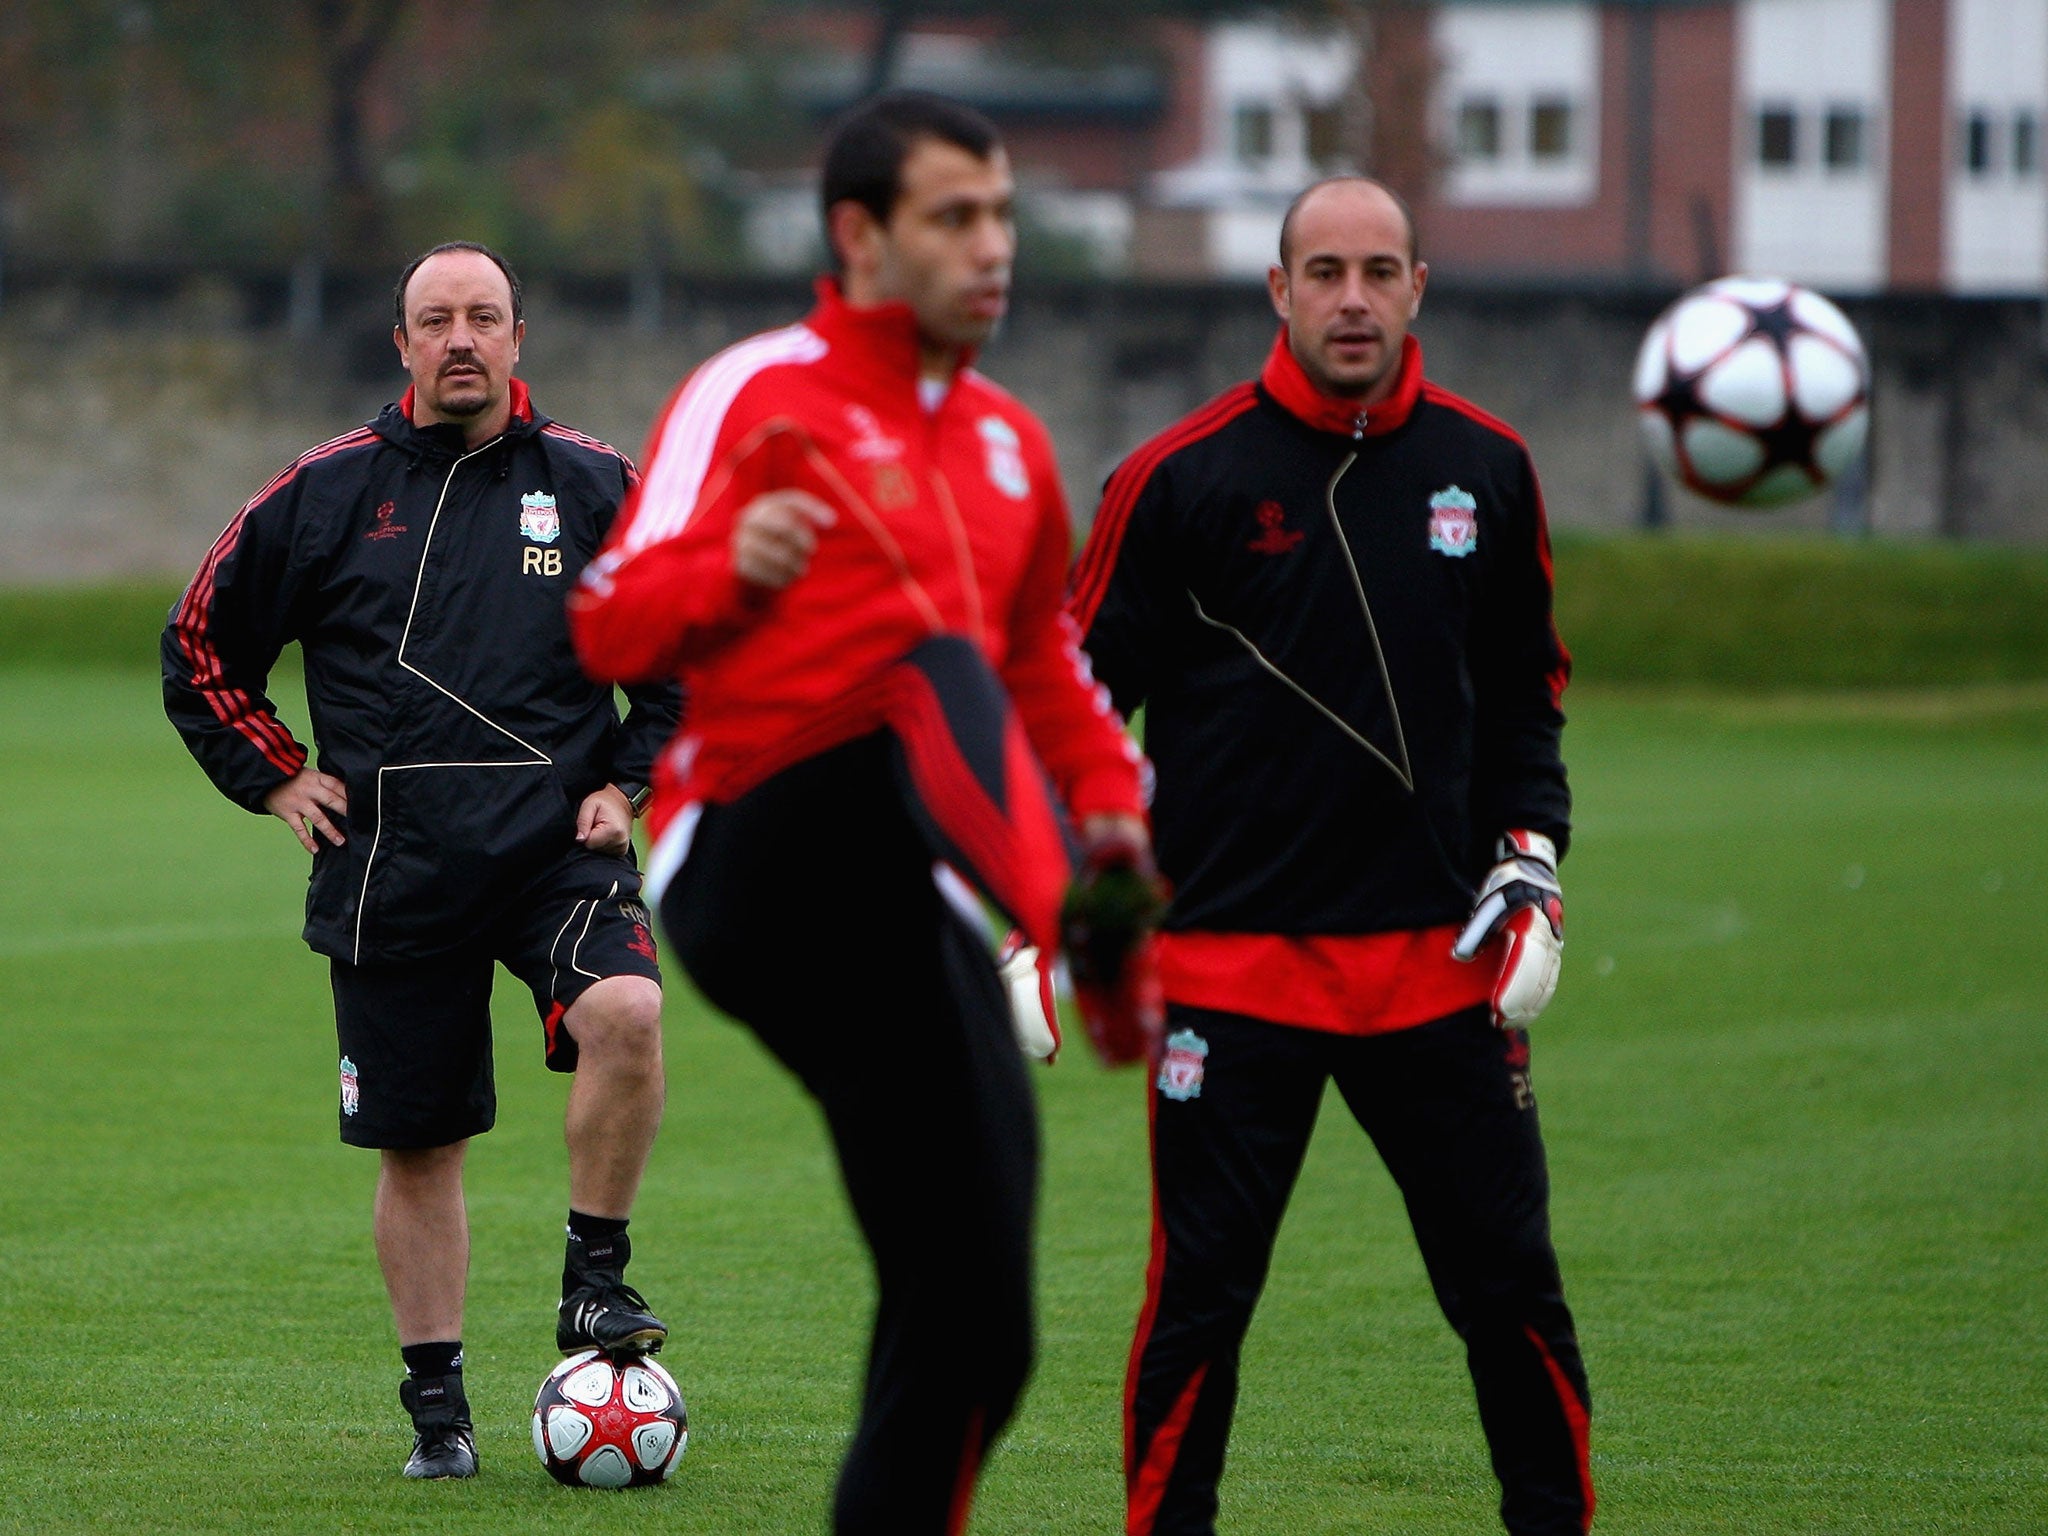 Watching Javier Mascherano and Pepe Reina during Liverpool training in 2009. A conversation with Mascherano persuaded him to join Liverpool from West Ham during the January transfer window, while Reina is now enjoying a new lease of life on loan at Napoli